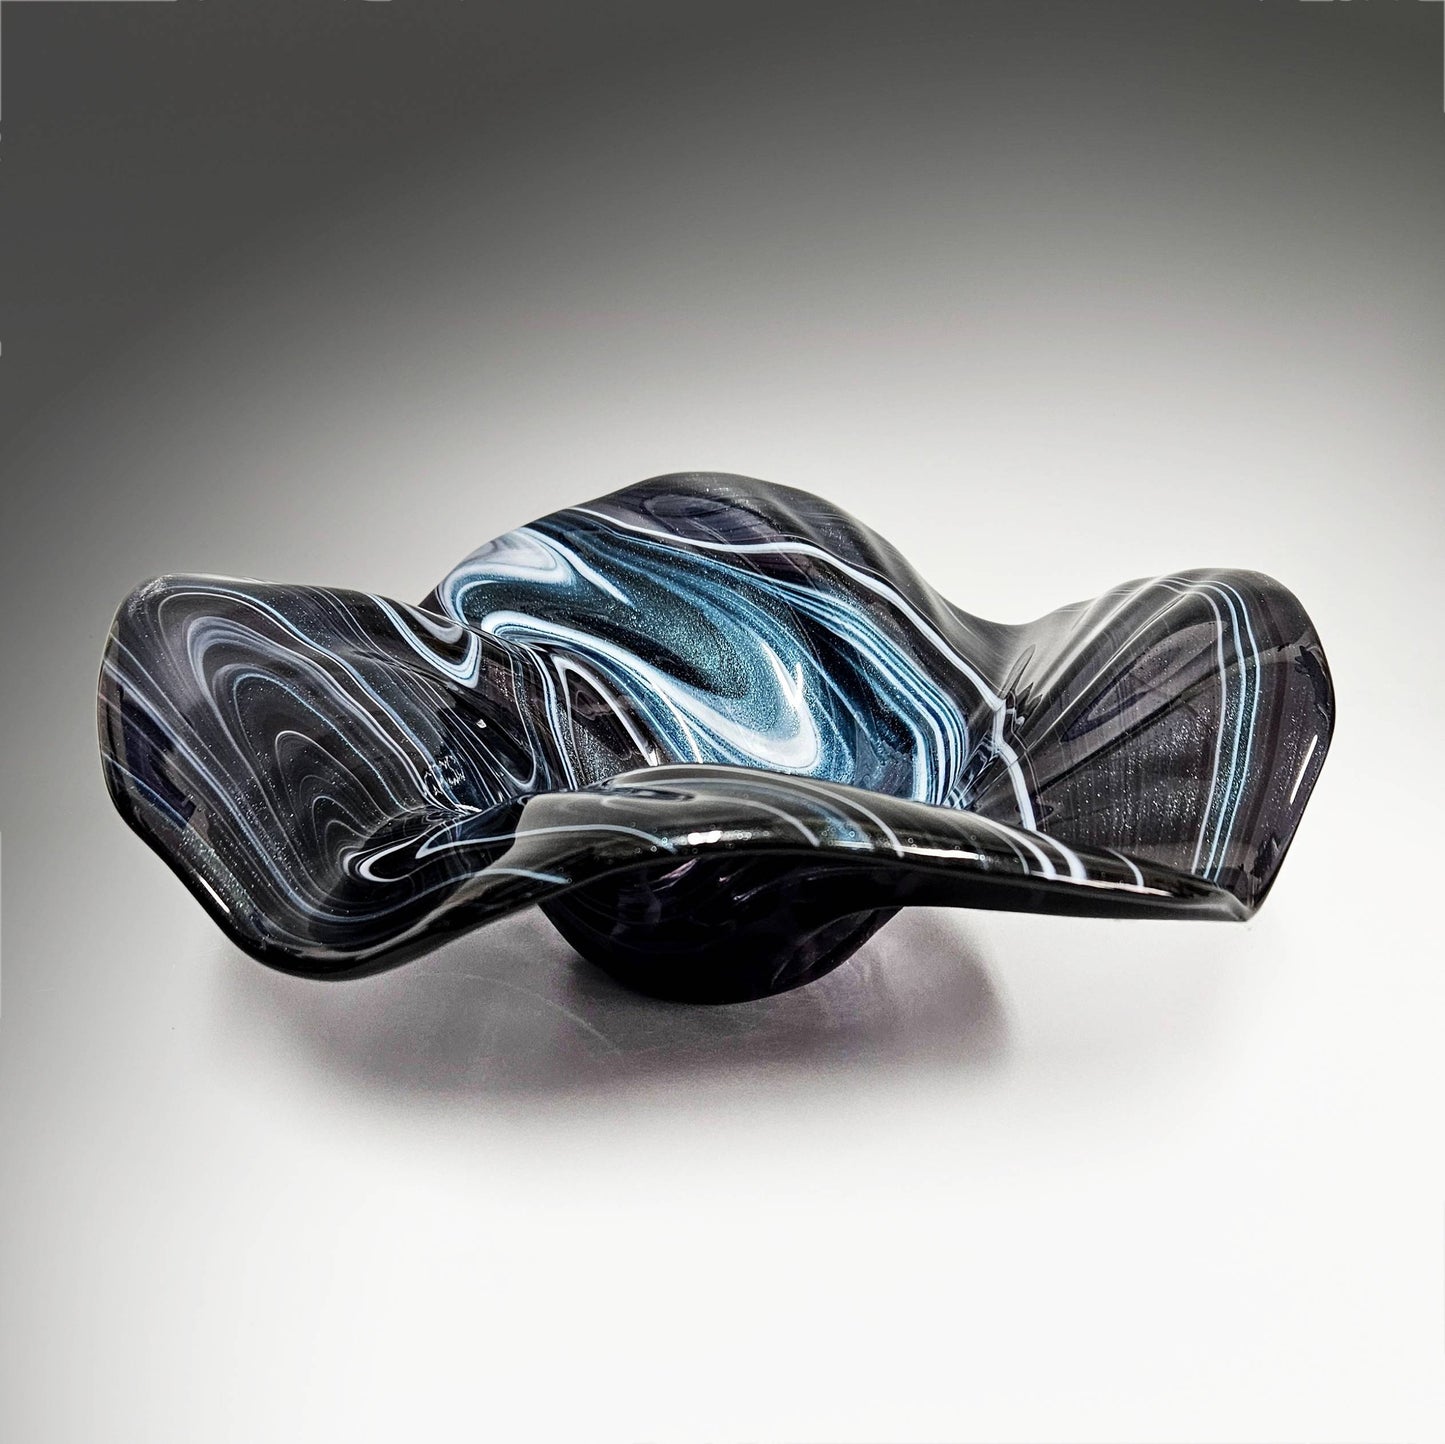 Glass Art Wave Bowl in Stormy Indigo Blue and White